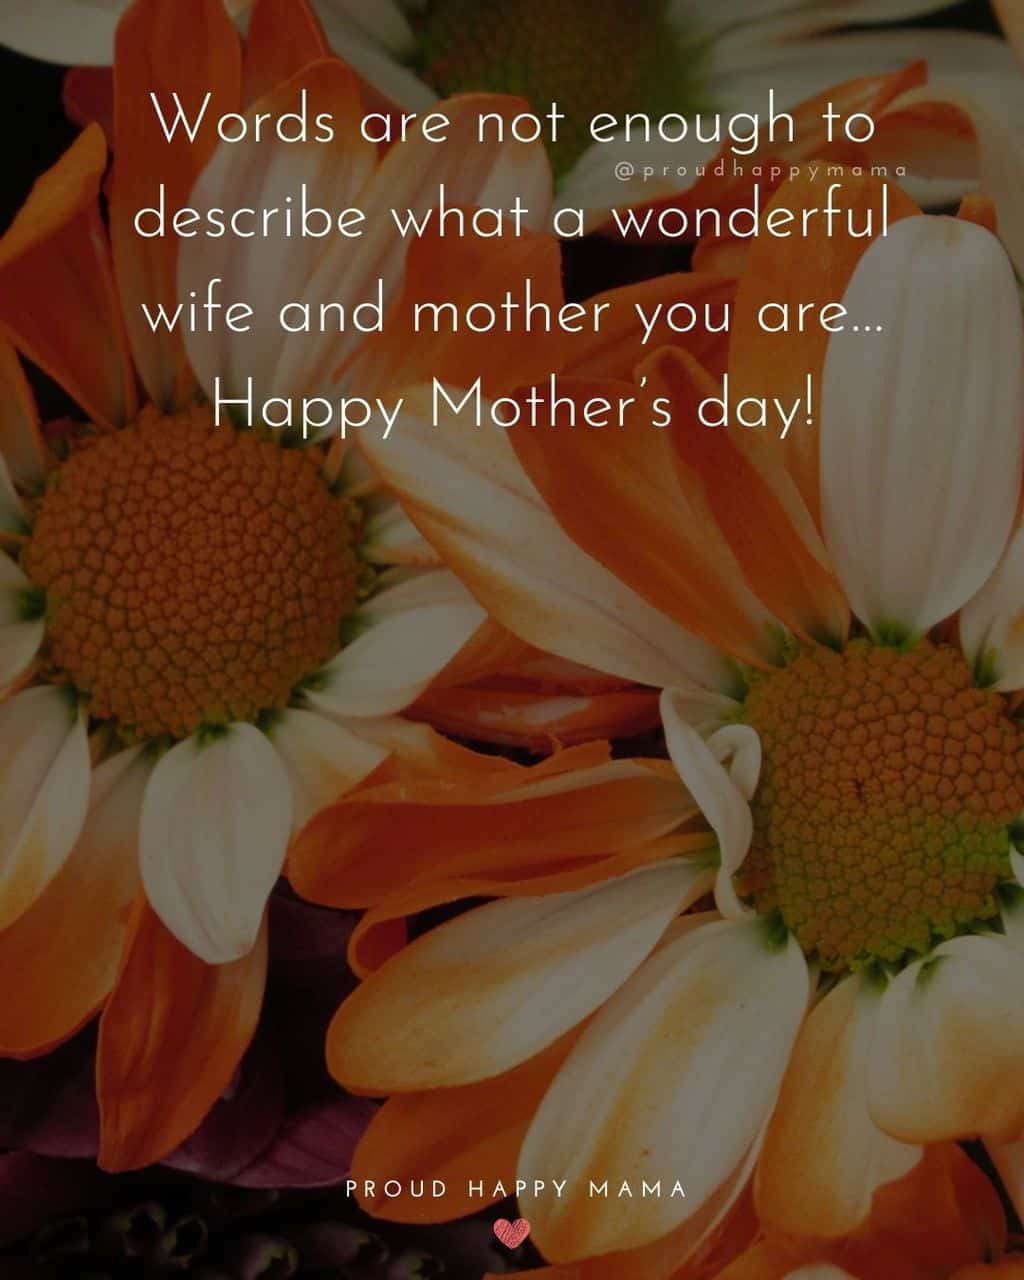 Happy Mothers Day Quotes For Wife - Words are not enough to describe what a wonderful wife and mother you are…Happy